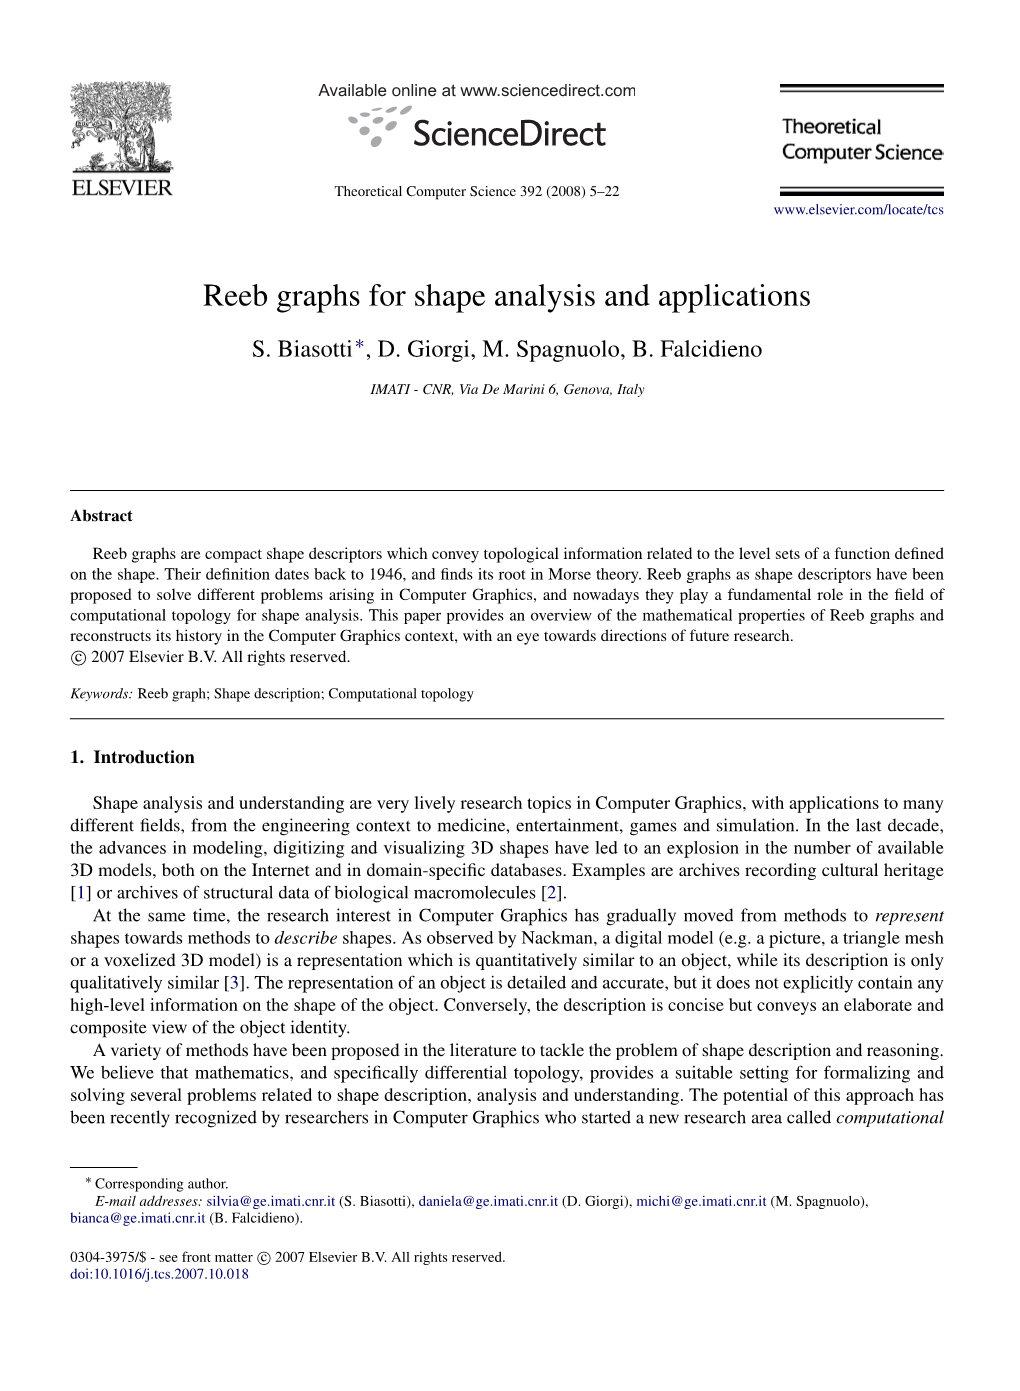 Reeb Graphs for Shape Analysis and Applications